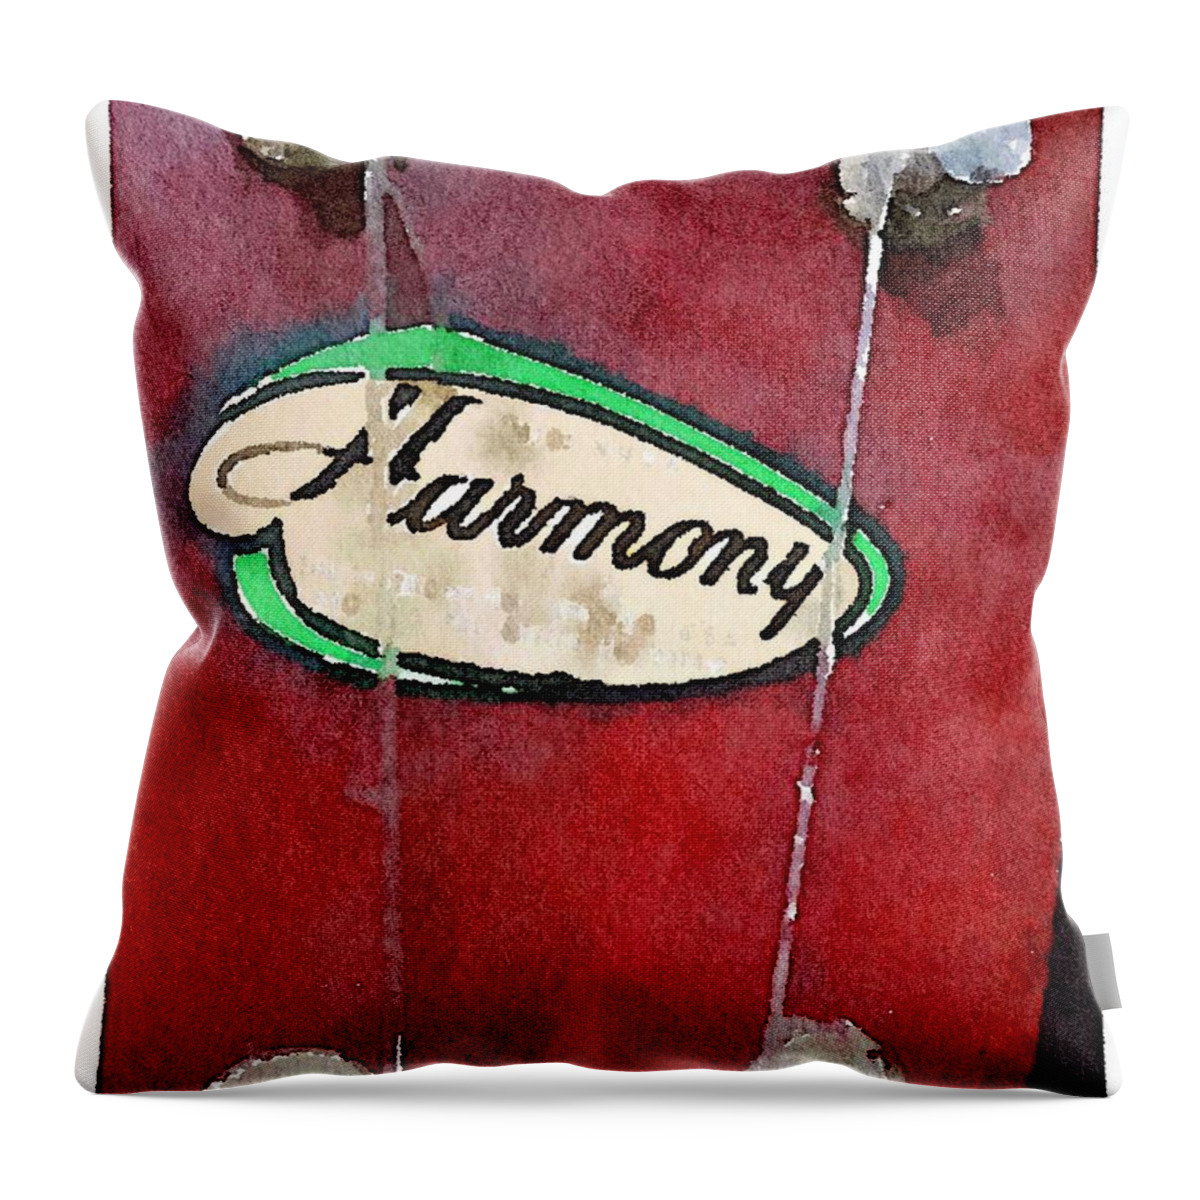 Waterlogue Throw Pillow featuring the digital art Harmony Uke by Shannon Grissom